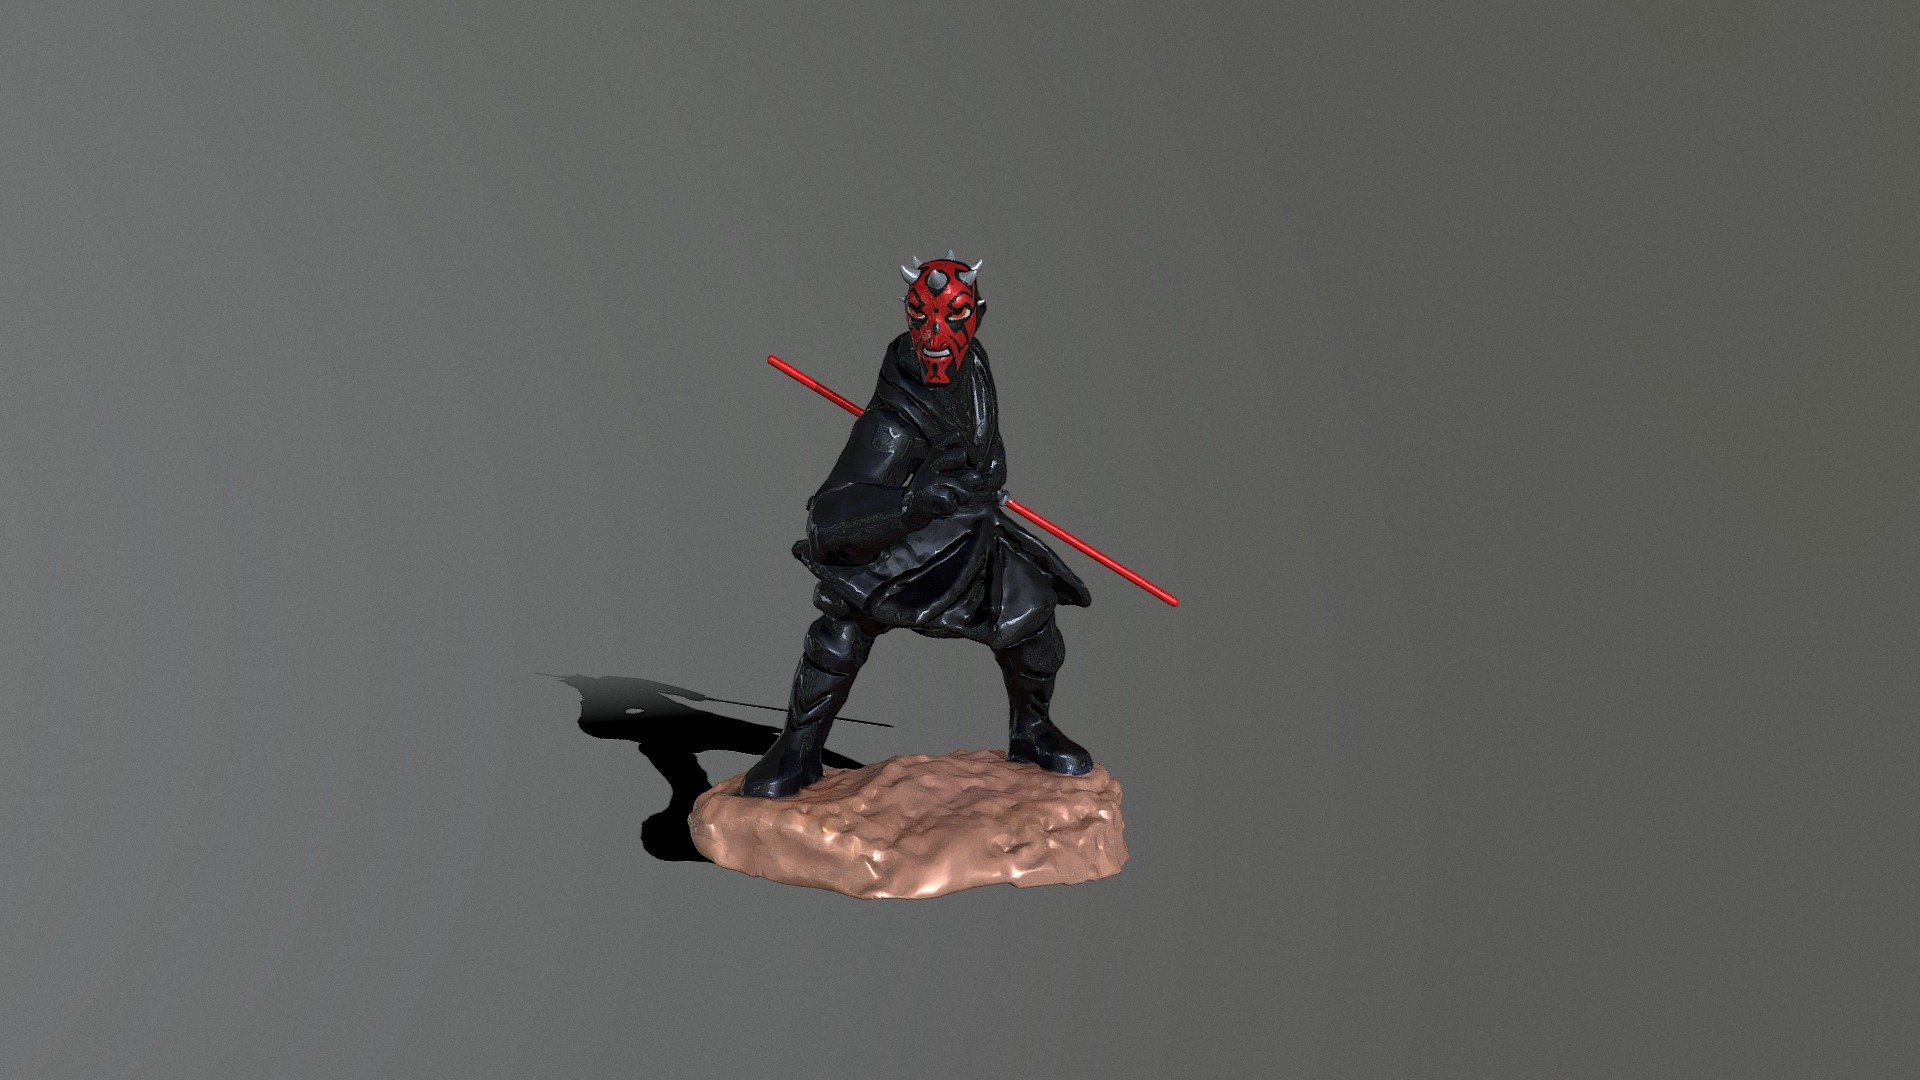 Free 3d Models Download Of Darth Maul Statues